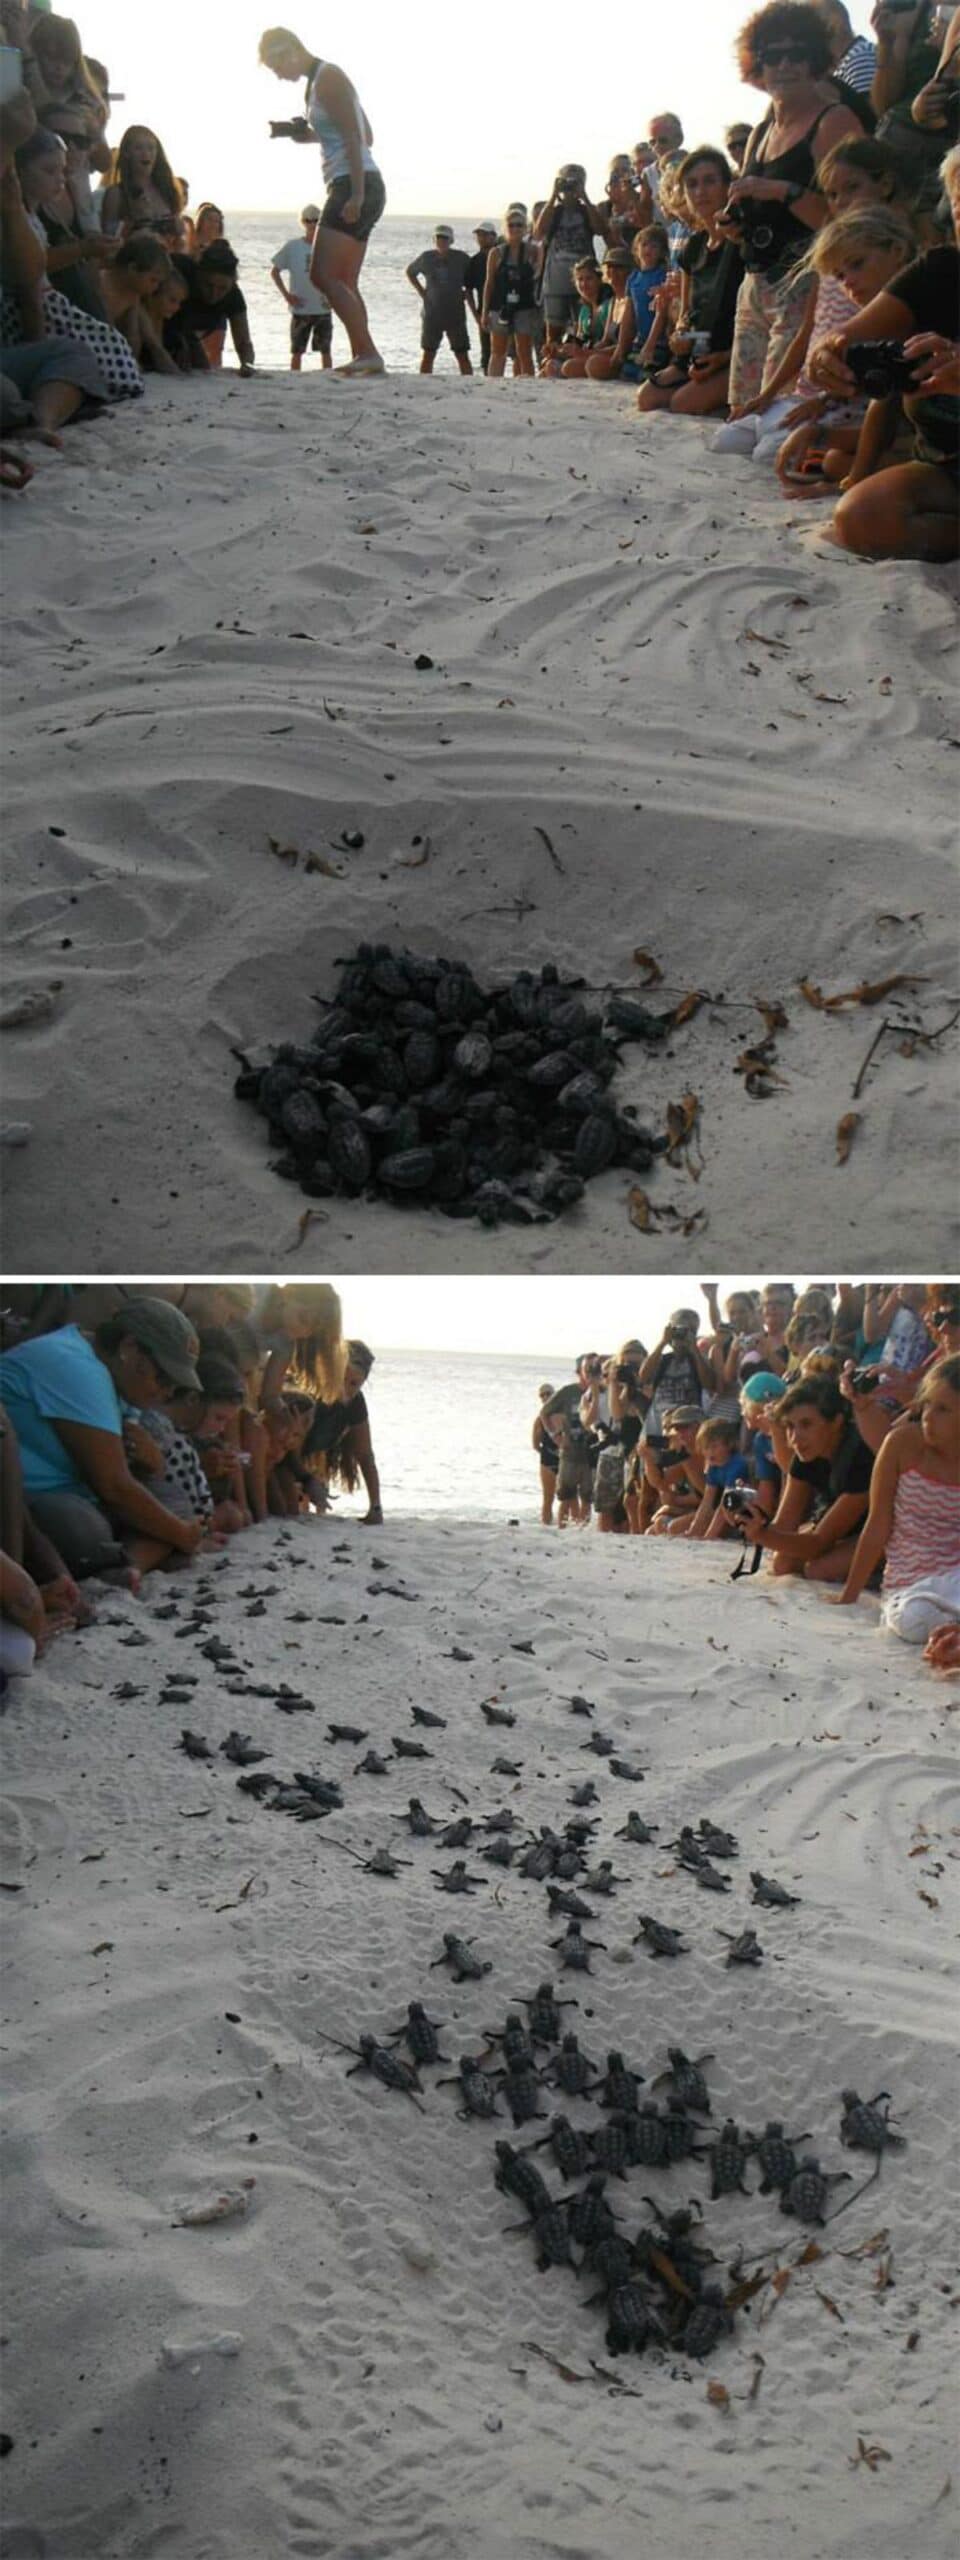 2 photos of people forming a human wall on either side of a bunch of tiny turtles walking on the white beach to the ocean